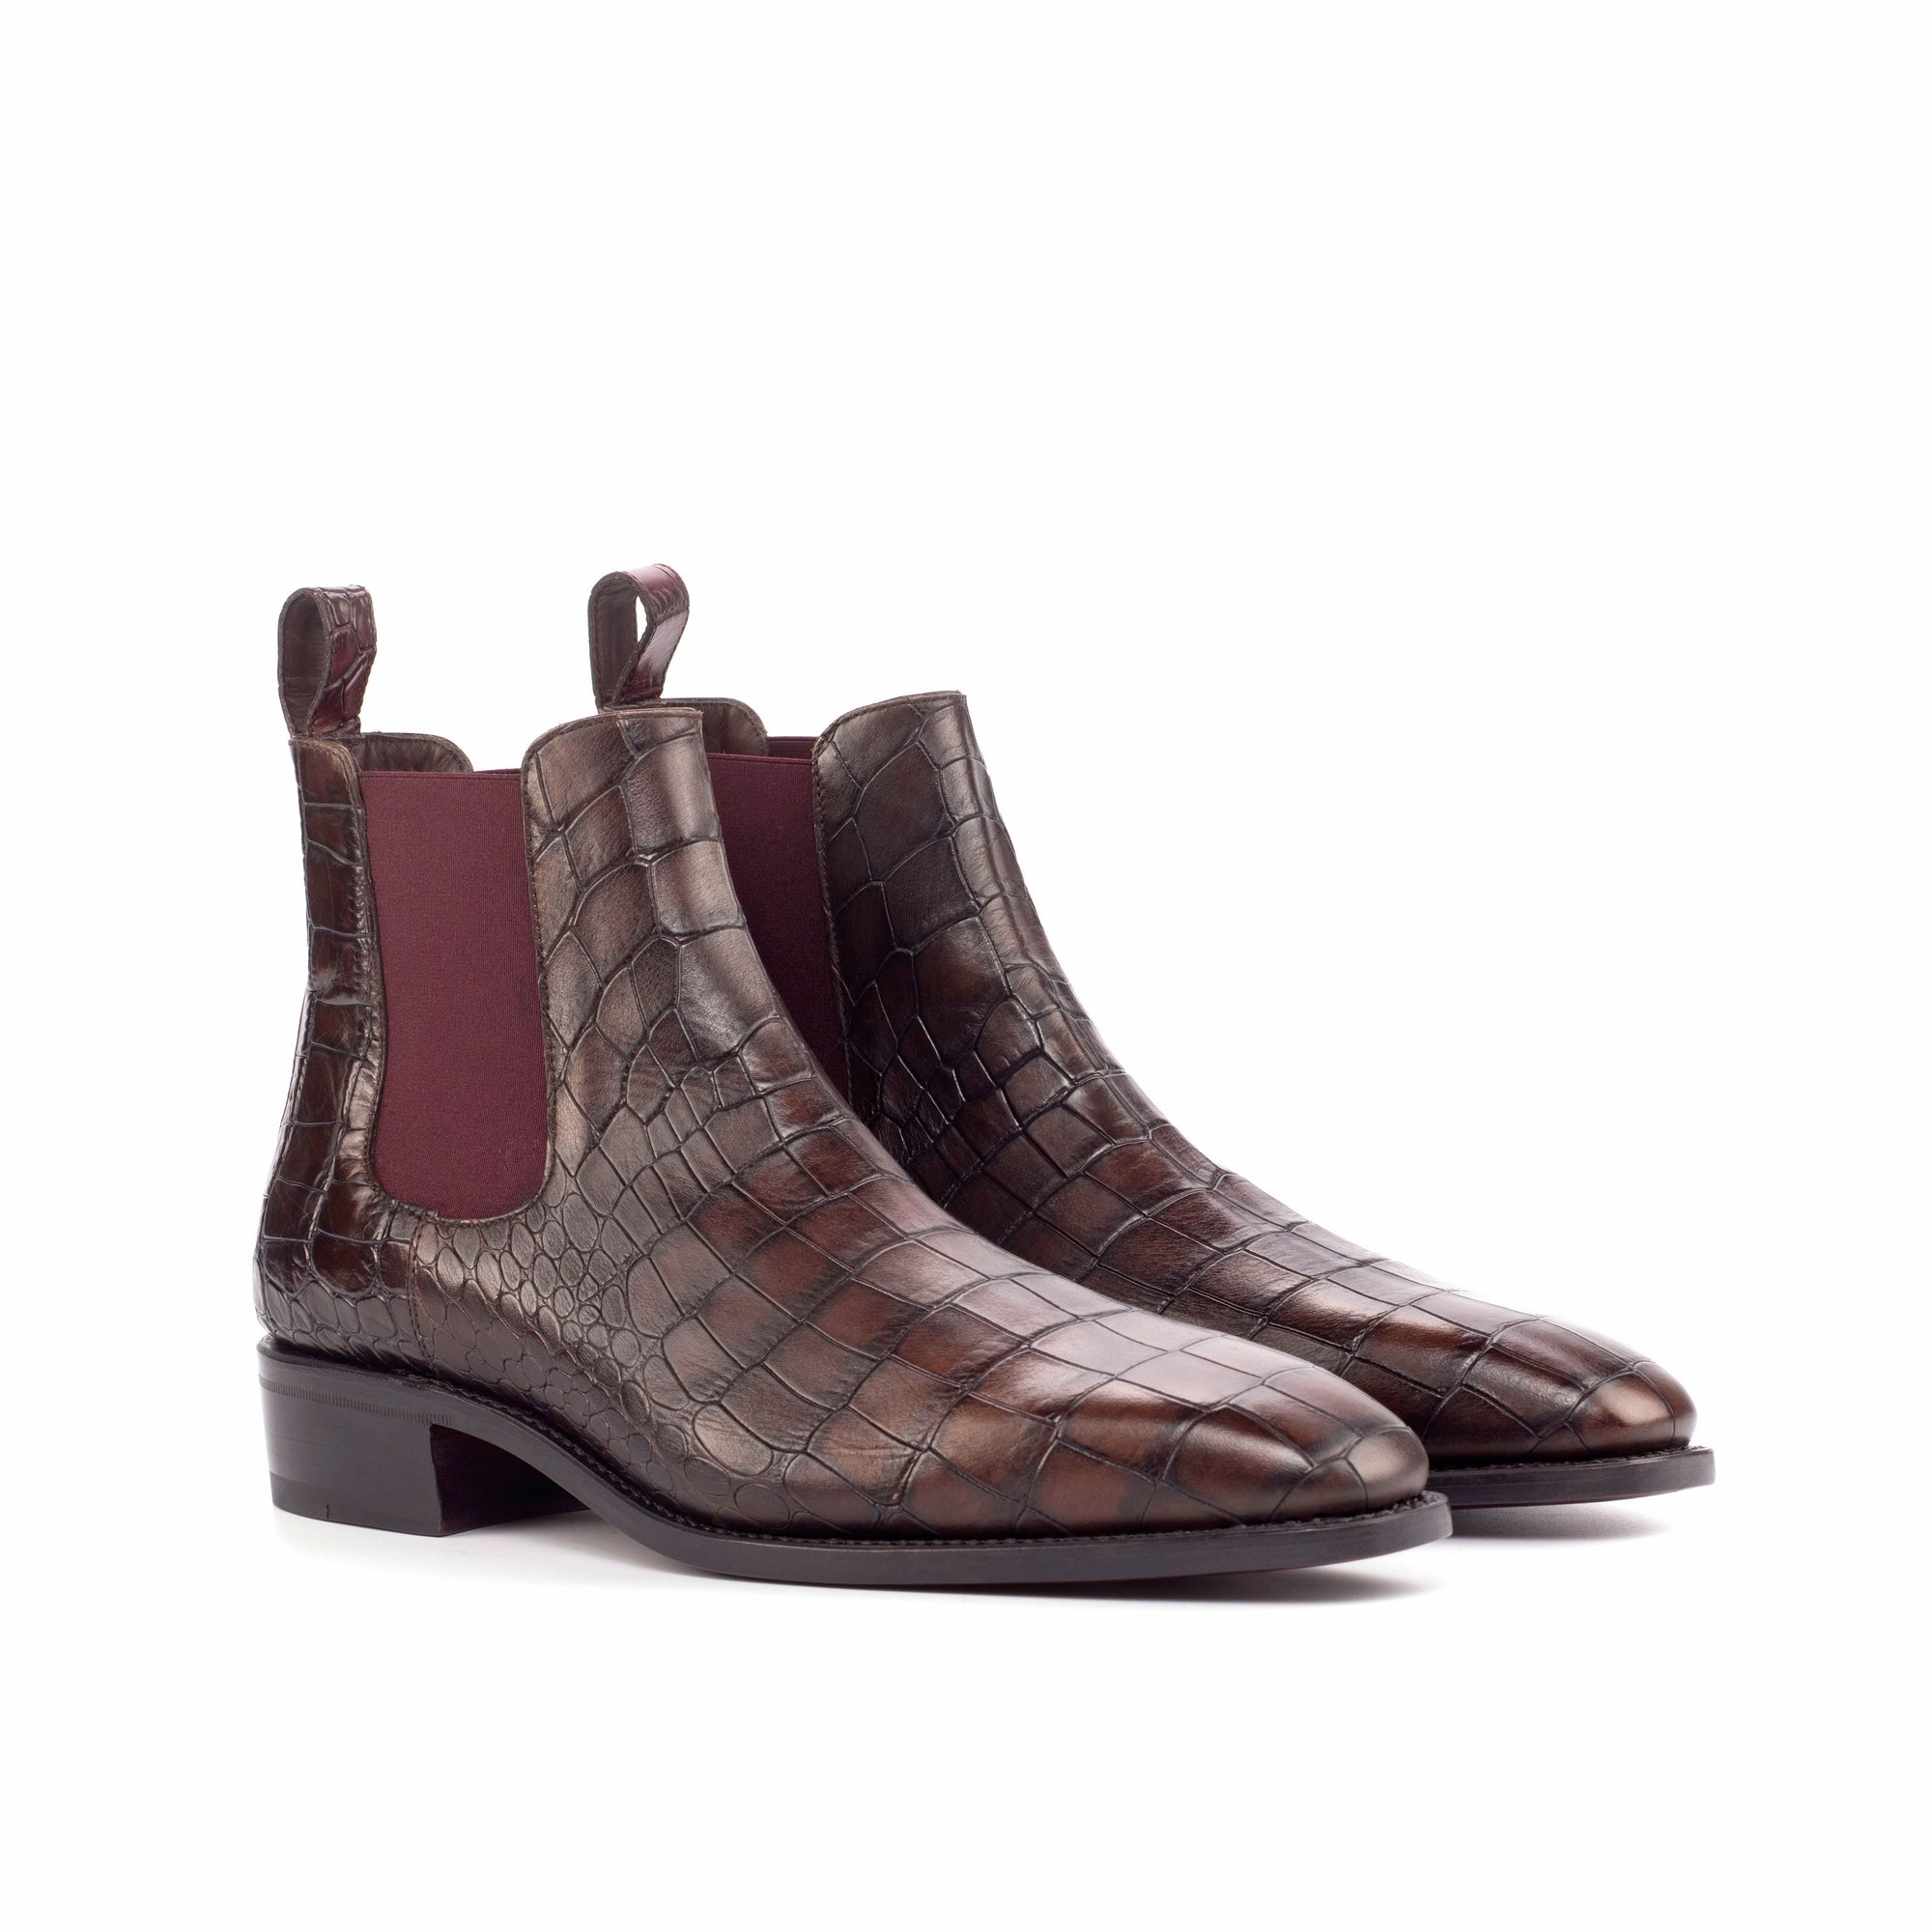 Goodyear Welted Chelsea Boots - Dark Brown and Burgundy Croco Leather with Cuban Heel